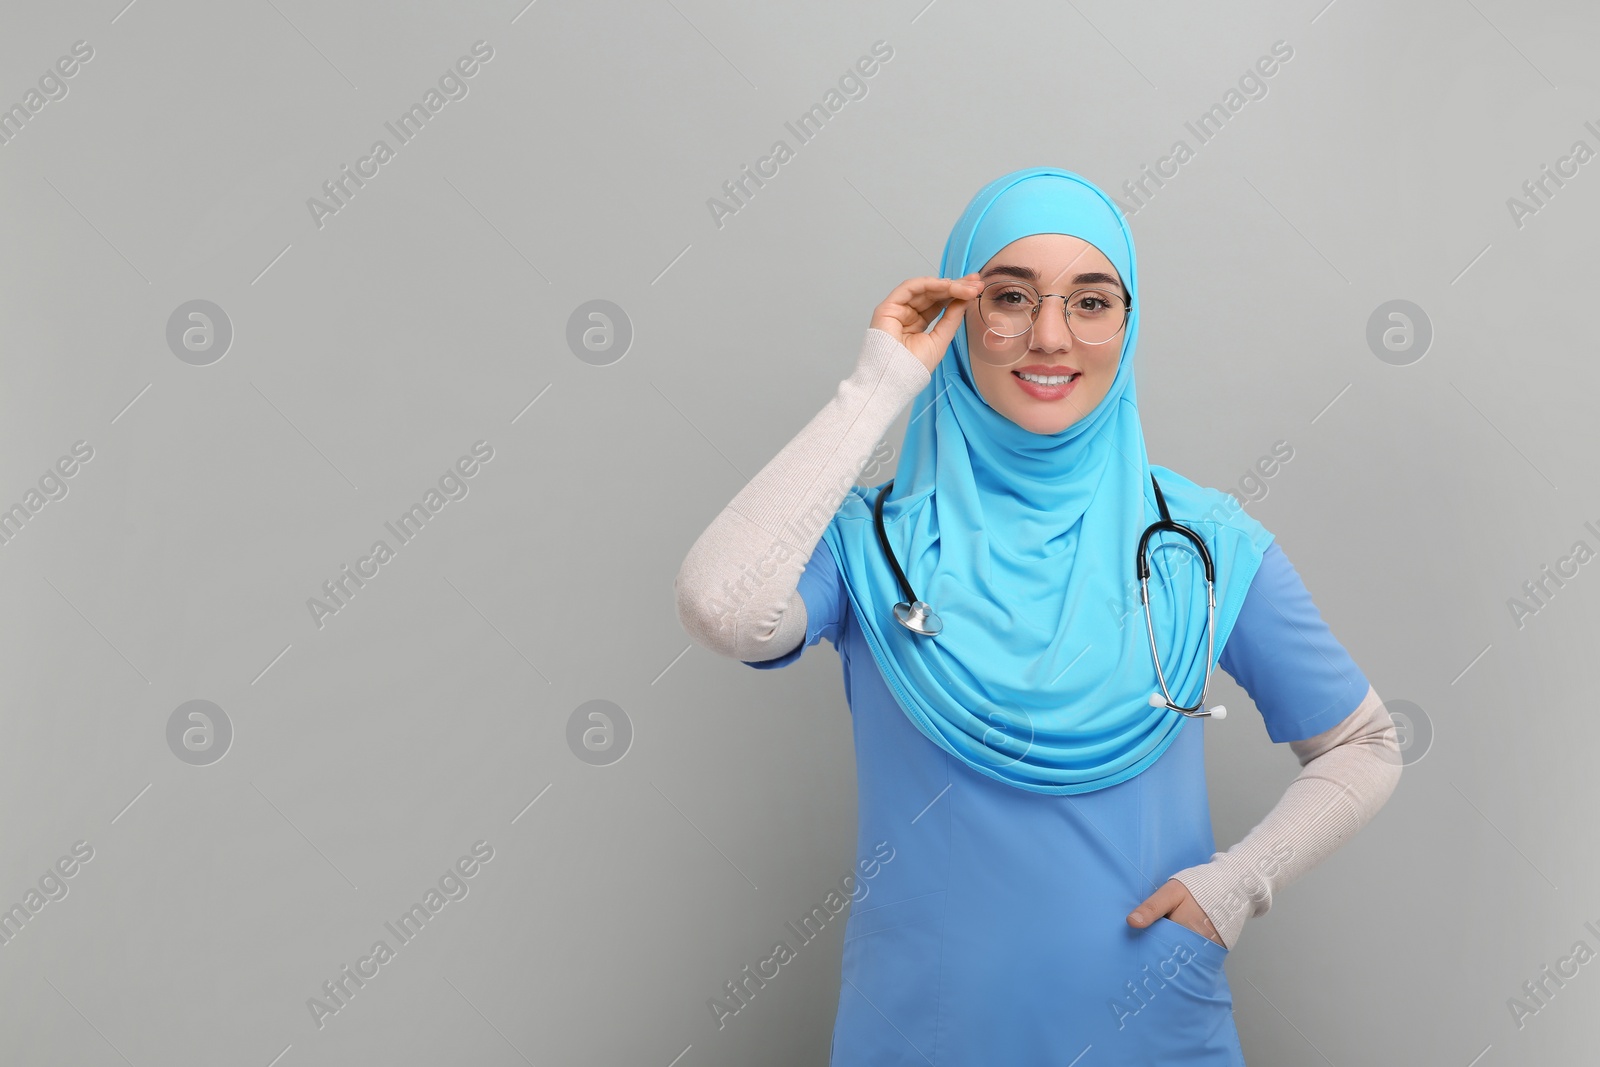 Photo of Muslim woman wearing hijab and medical uniform with stethoscope on light gray background, space for text